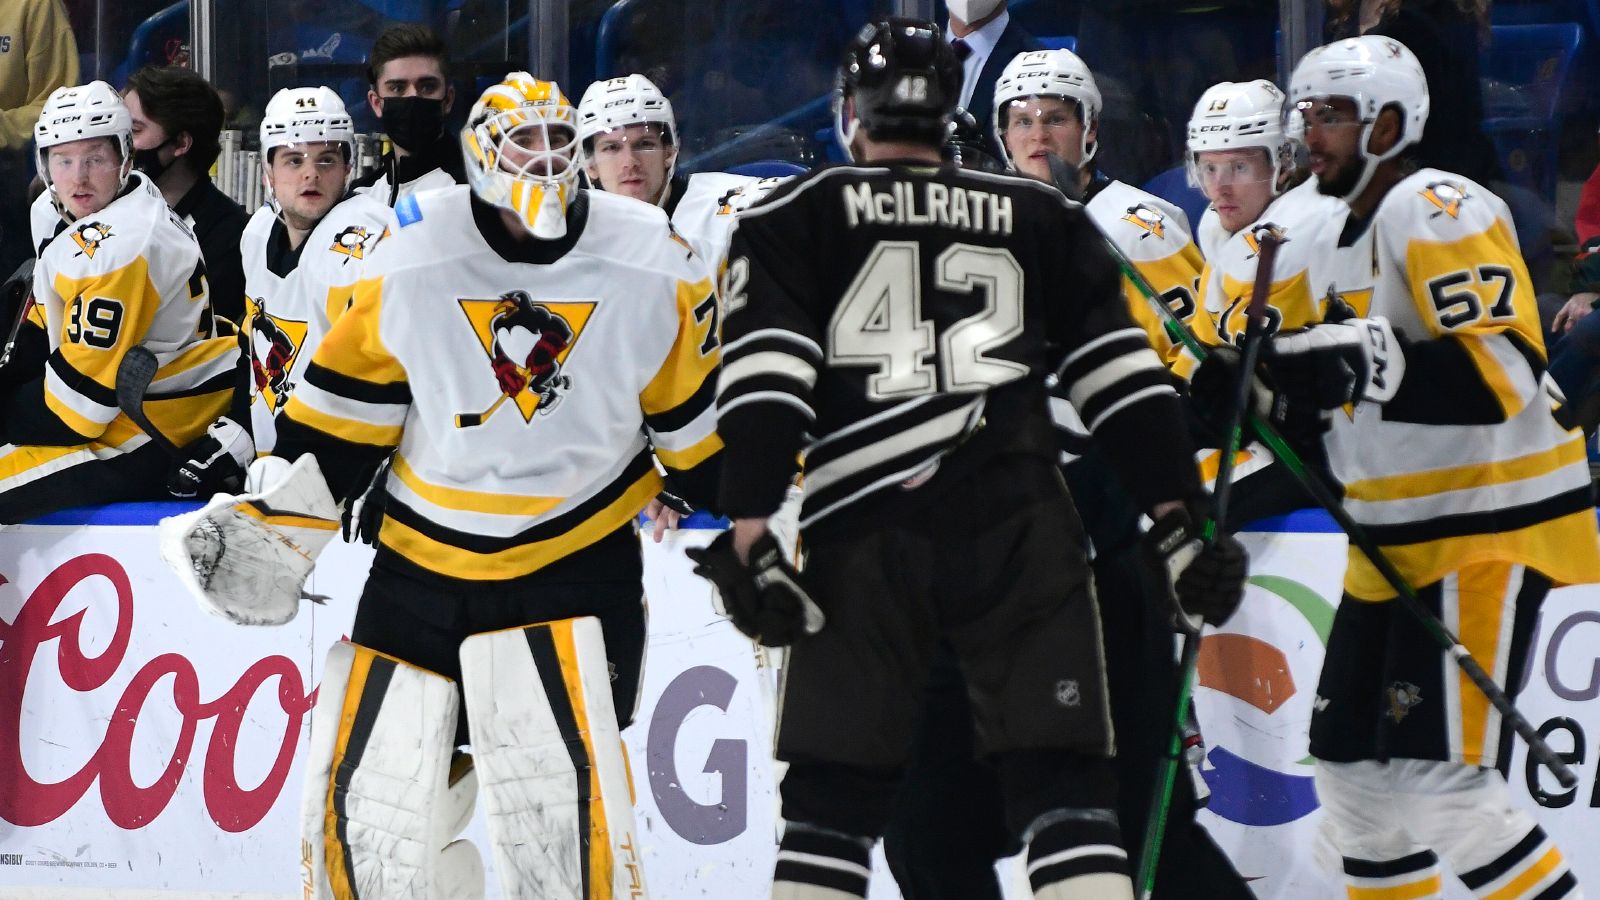 WBS Penguins getting a bit sick of losing to Hershey Bears